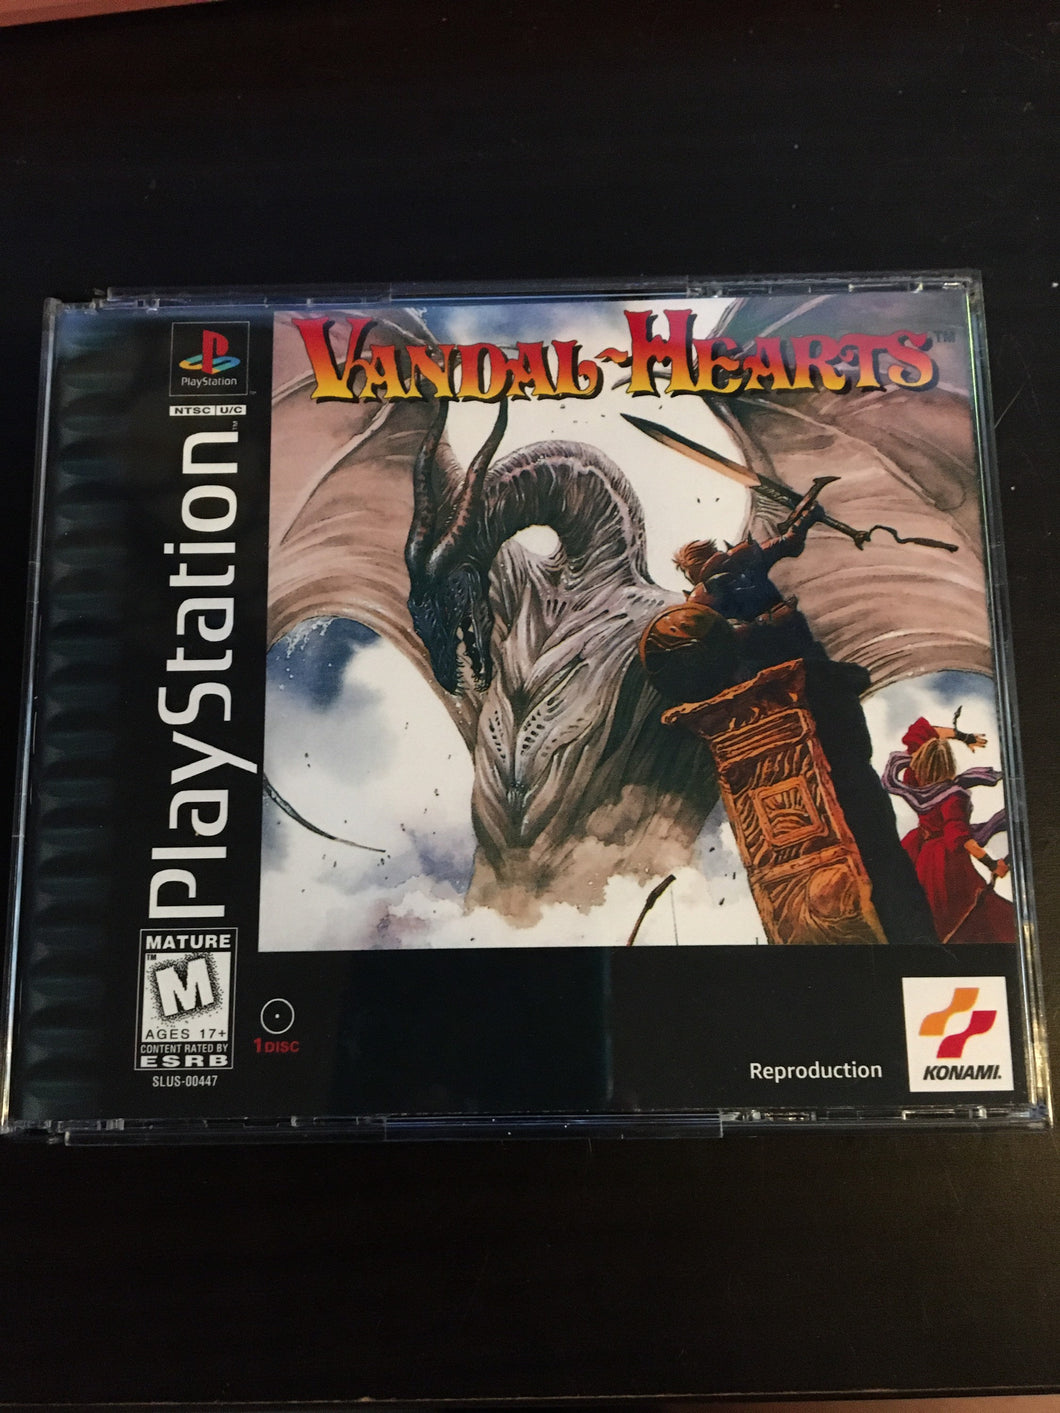 Vandal Hearts PS1 RPG Reproduction Case